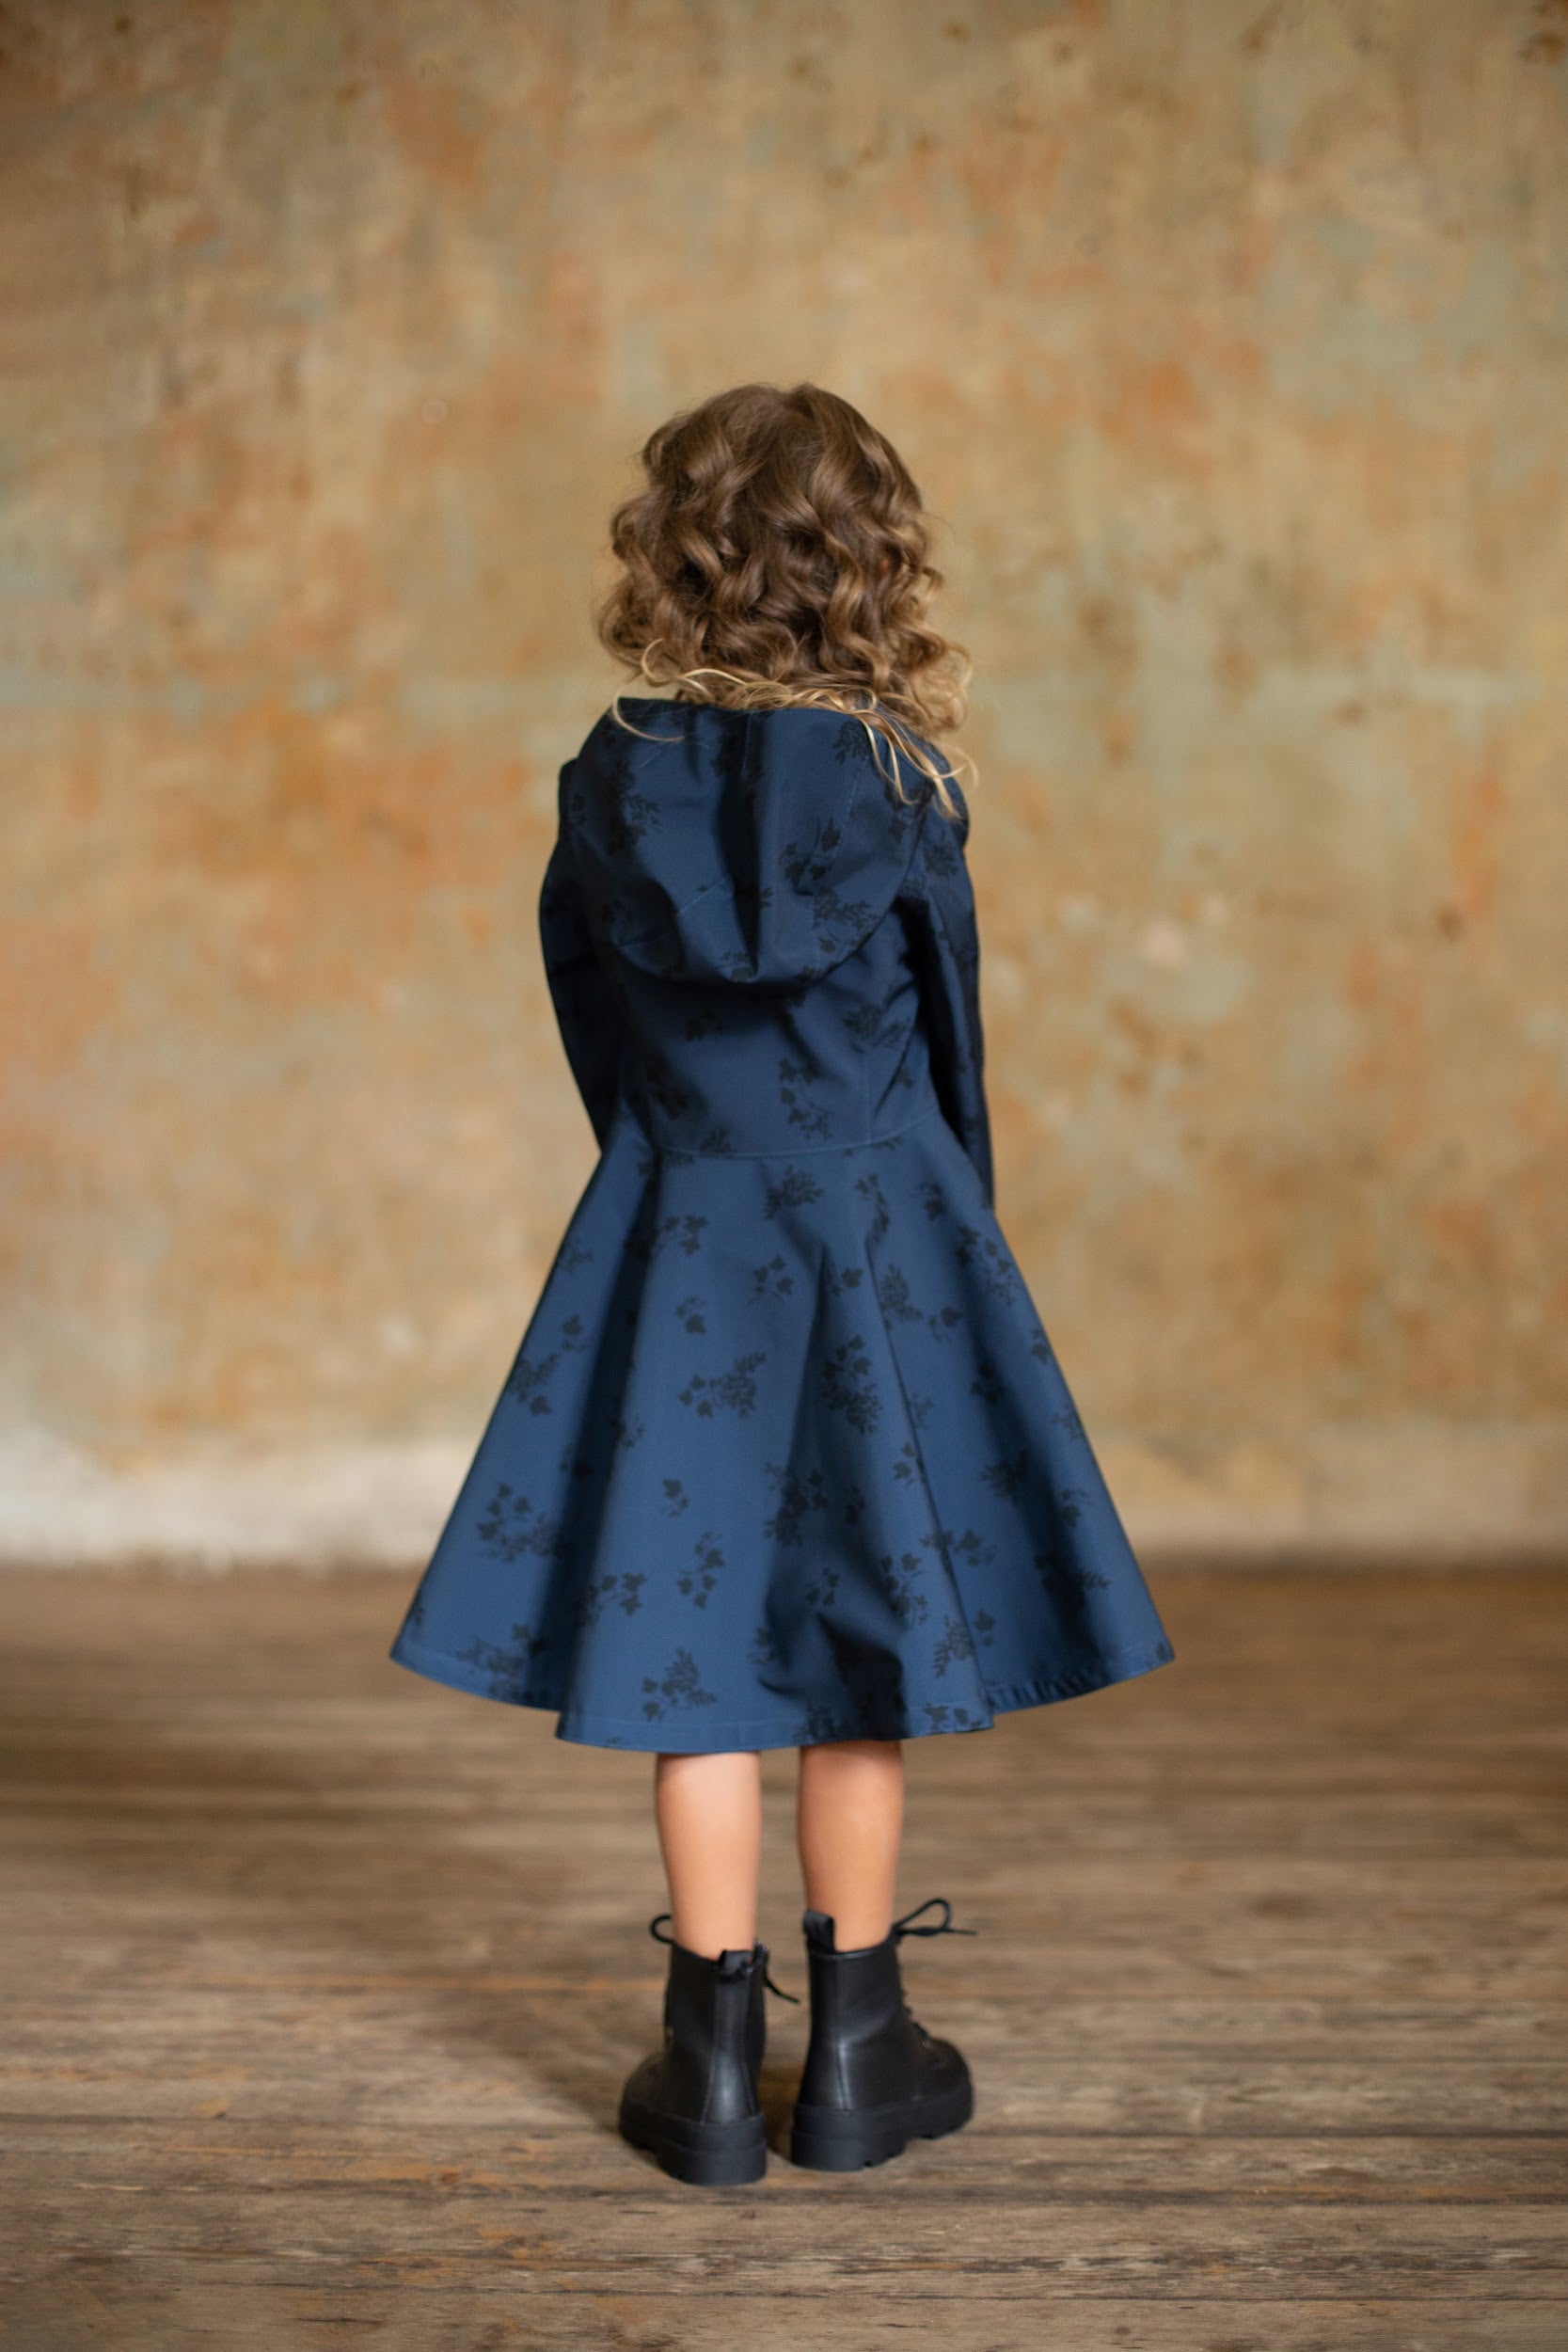 Hooded Dark Blue Coat with Floral Print for Girls 